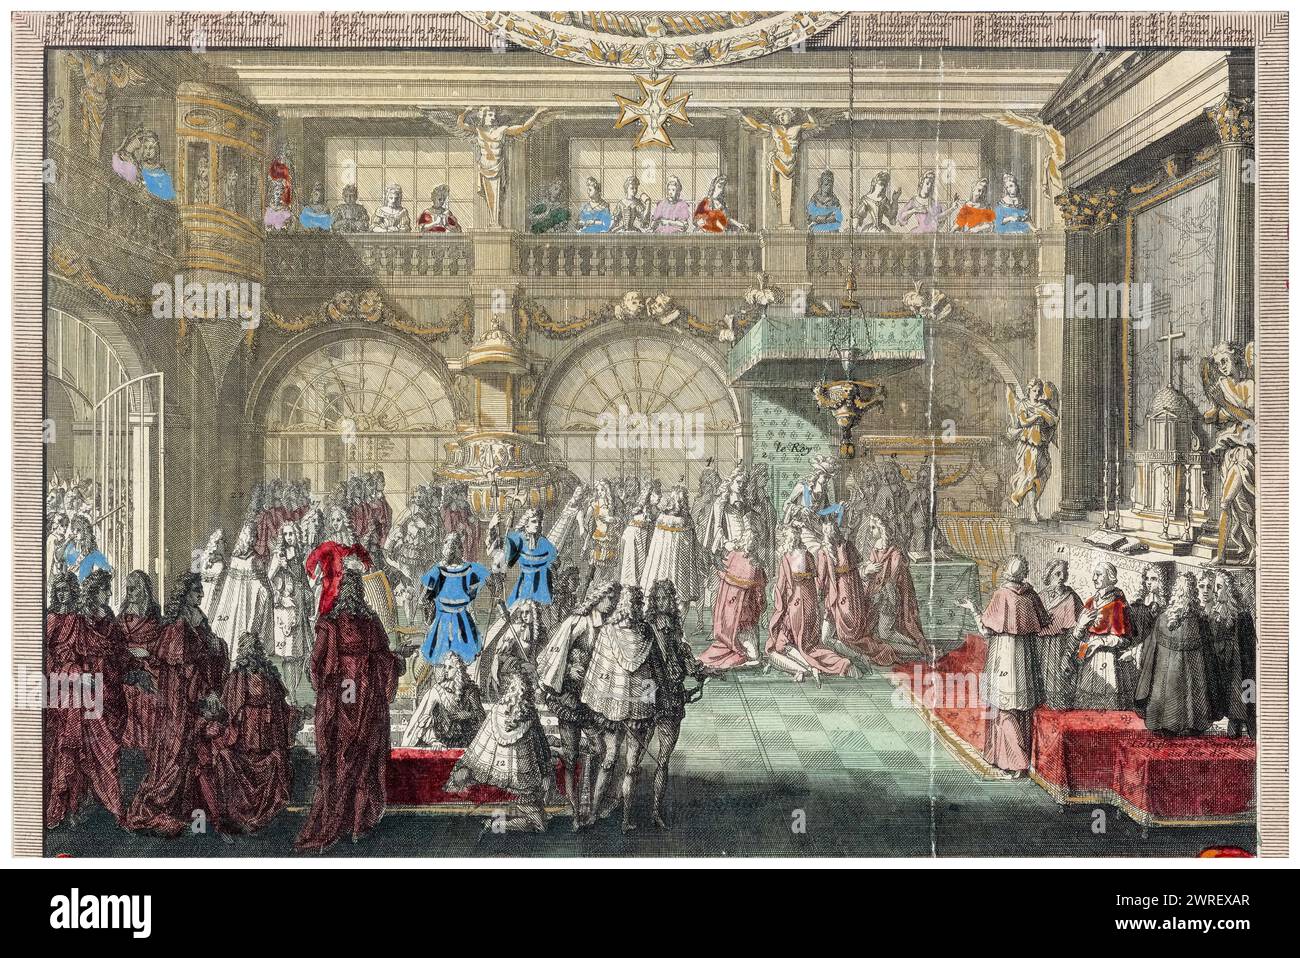 Creation of the Knights of the Order of the Holy Spirit by King Louis XIV of France in the Chapel of Versailles on January 1st and February 2nd 1689, engraving by Nicolas Langlois, 1690 Stock Photo